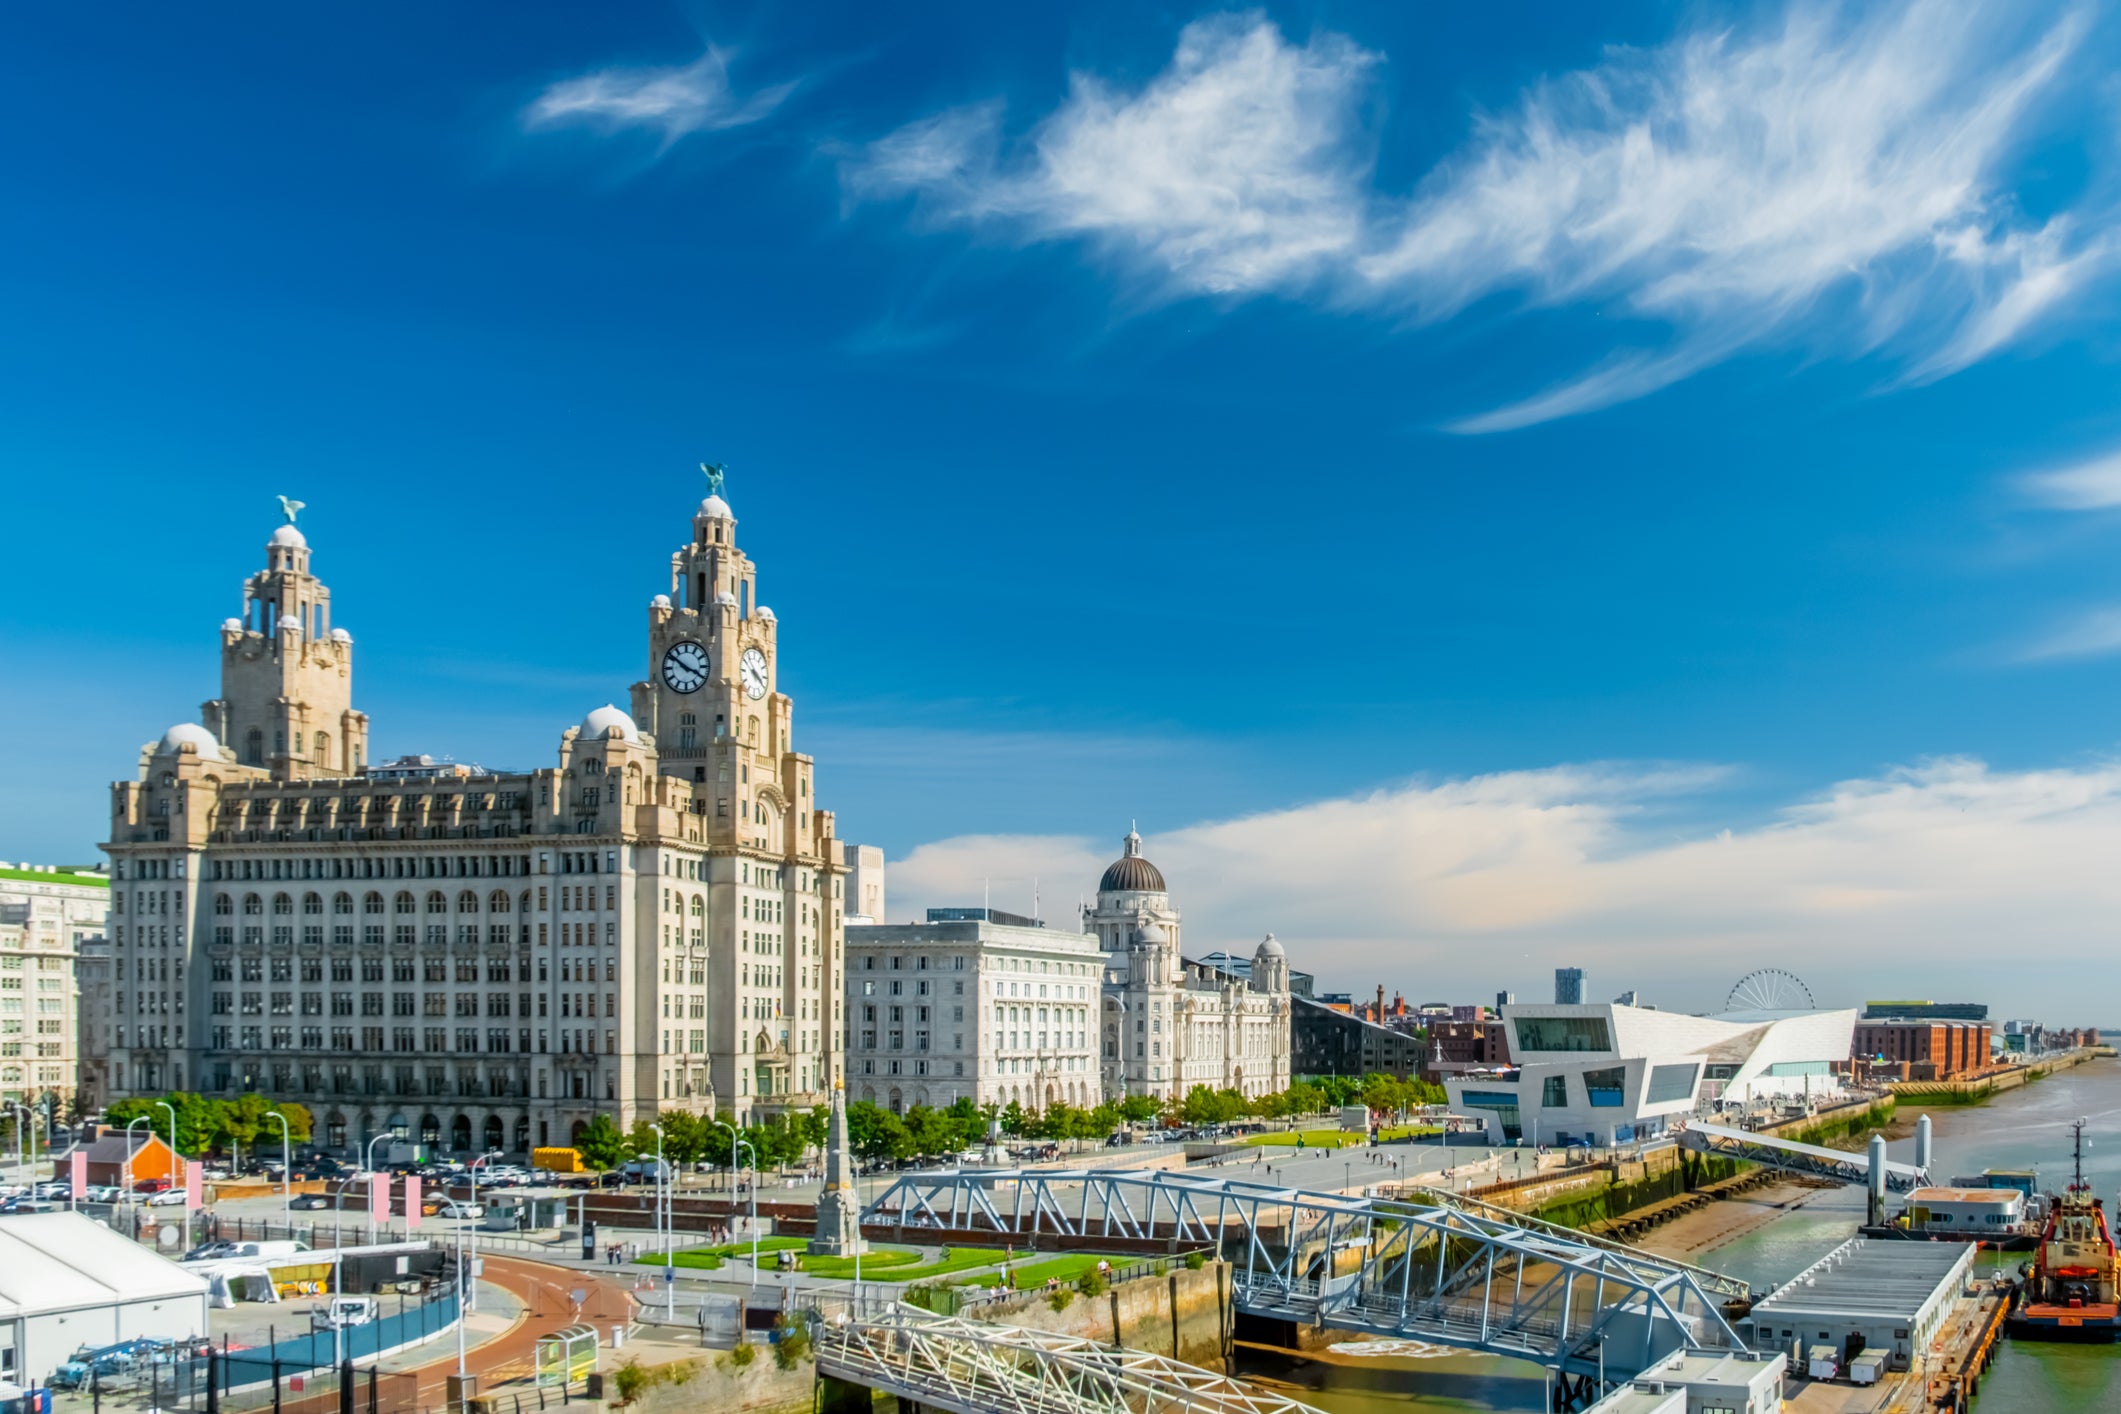 Liverpool received an overall city rating of 84 per cent